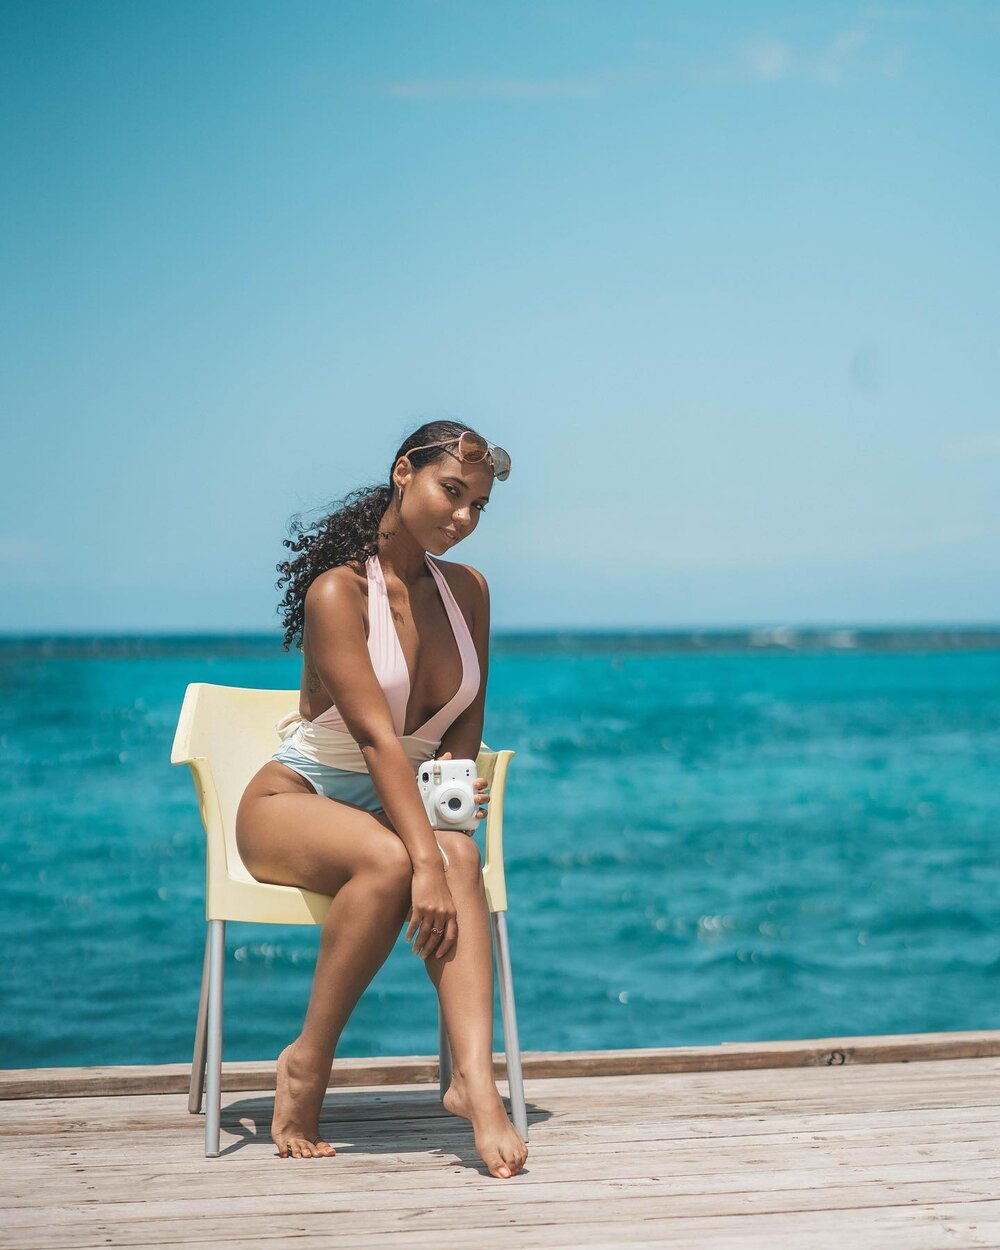 If you had to move to a coastal town, which one would you choose? 

For me, it&rsquo;s in Ocho Rios, Jamaica (though I would consider a few different places in Hawaii if the cost of living wasn&rsquo;t so high). Even though Ocho Rios is known as a re